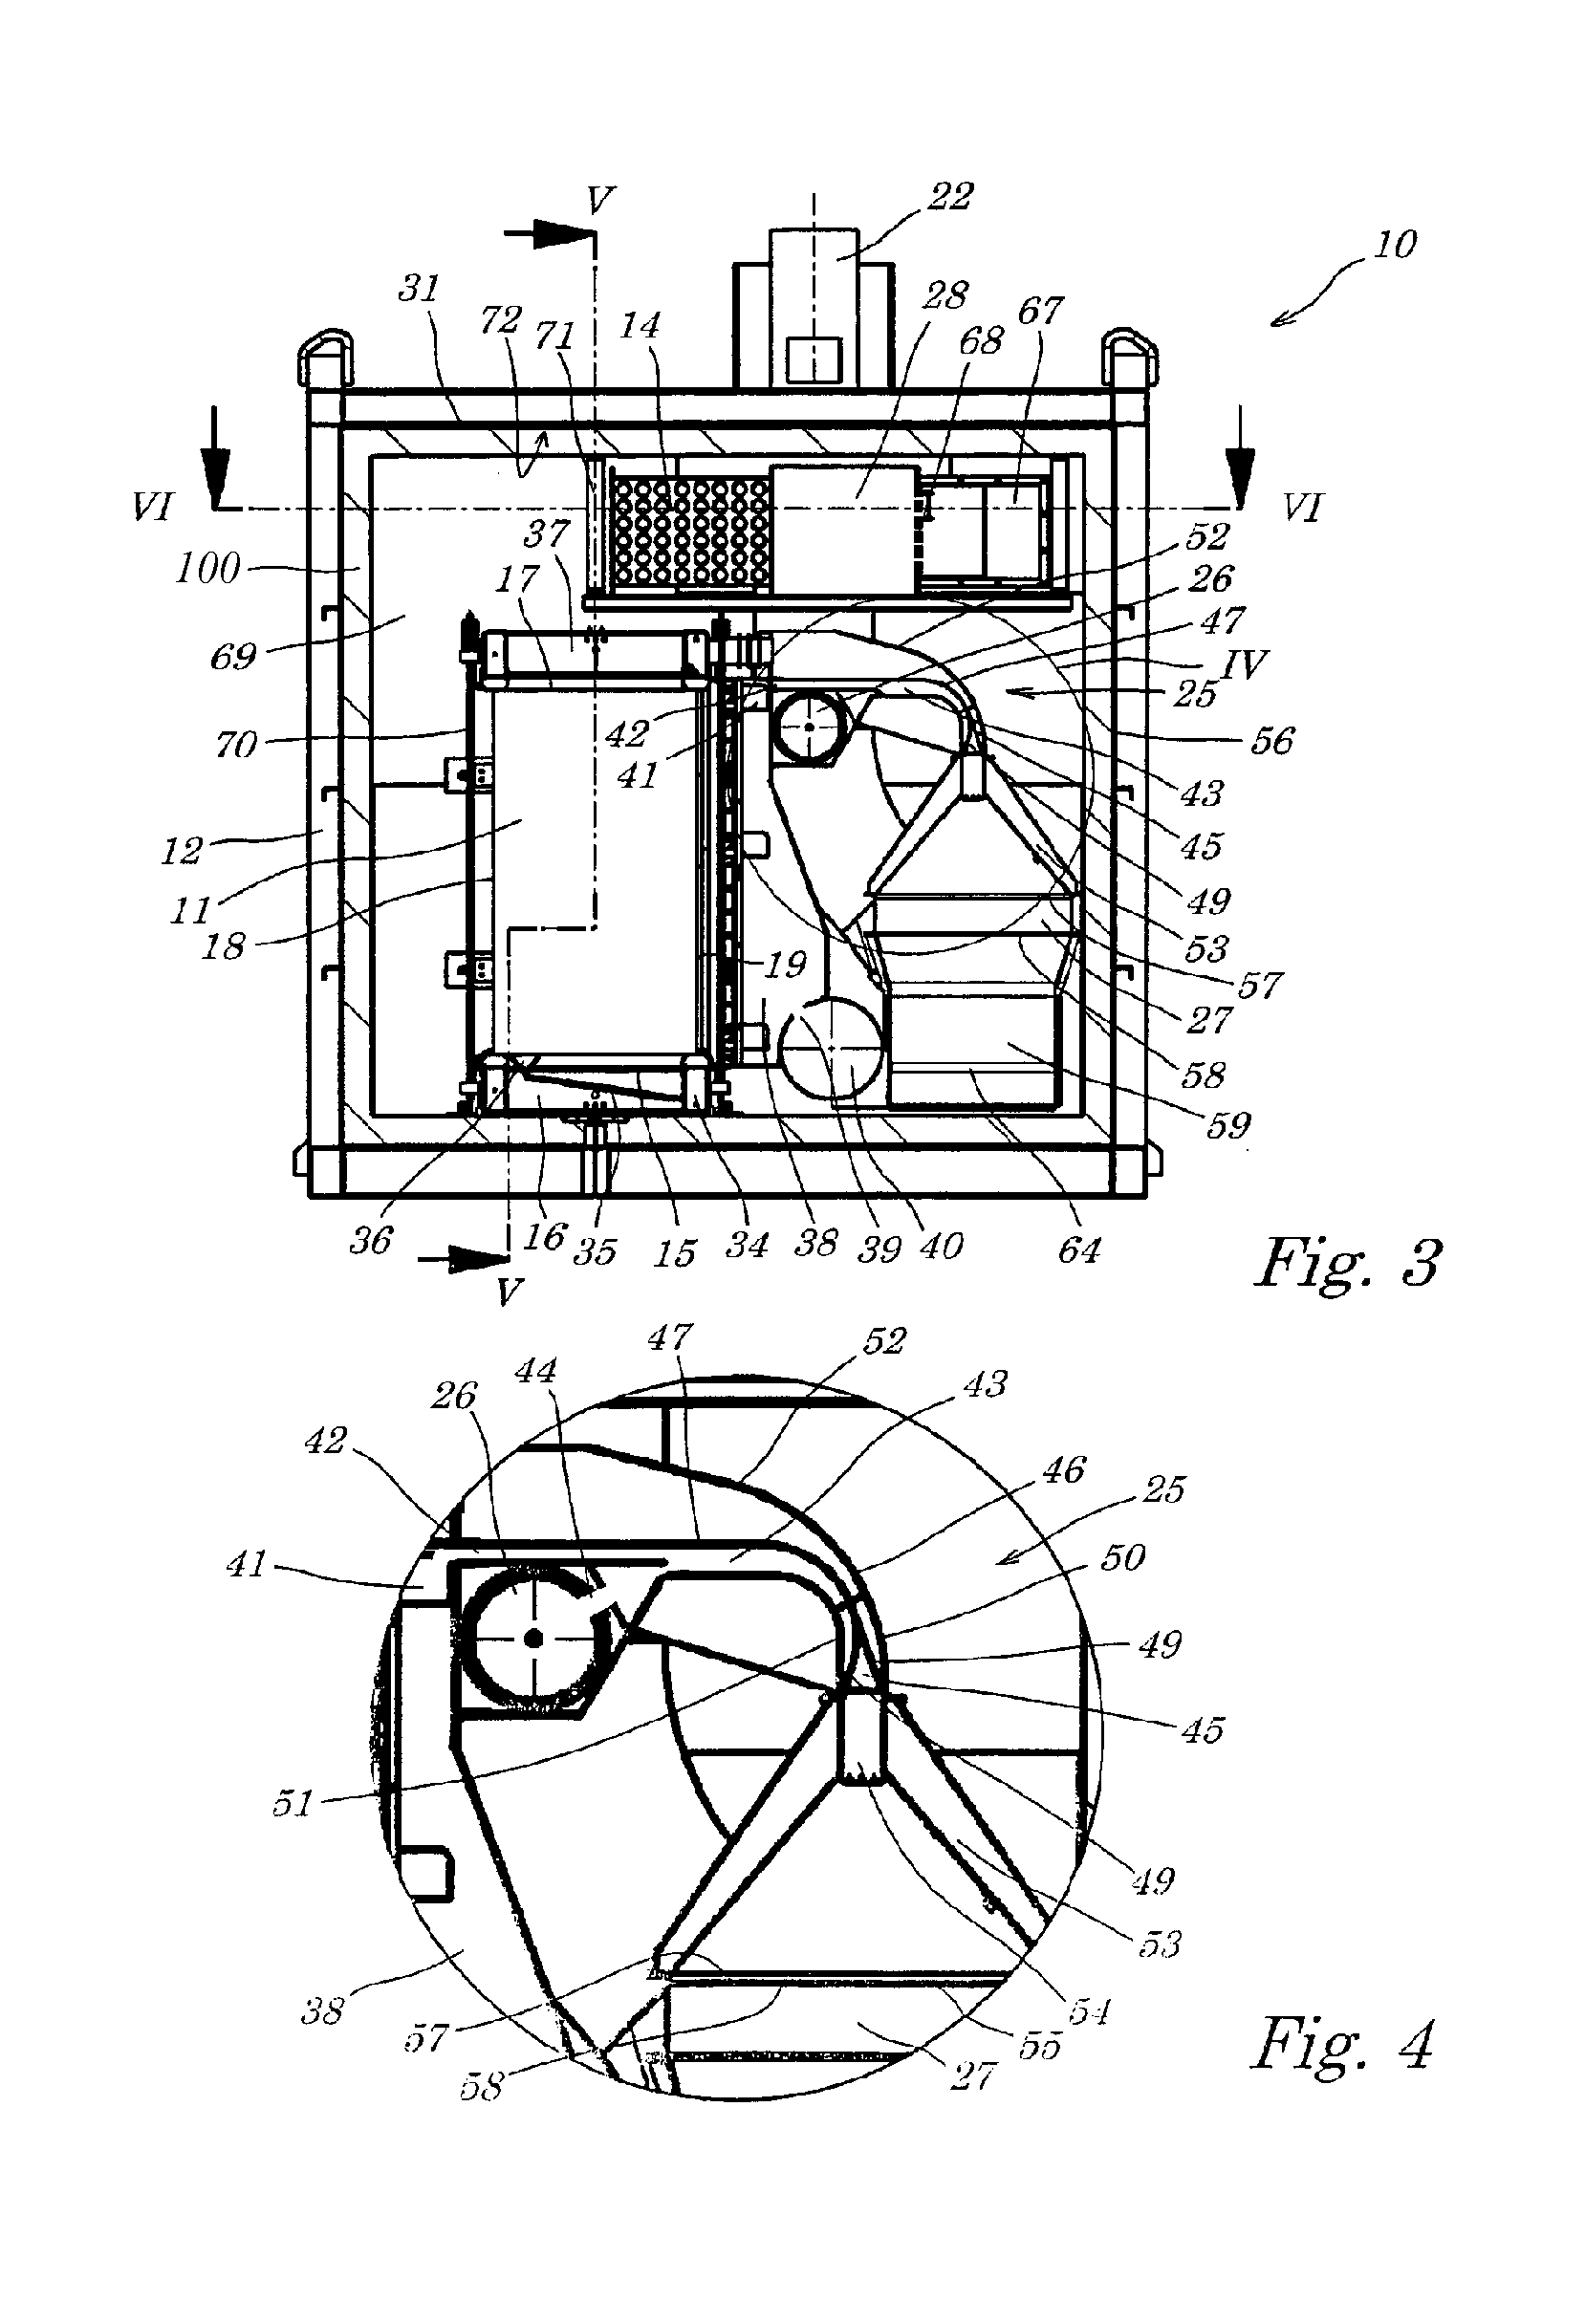 Fuel cell assembly comprising an improved catalytic burner